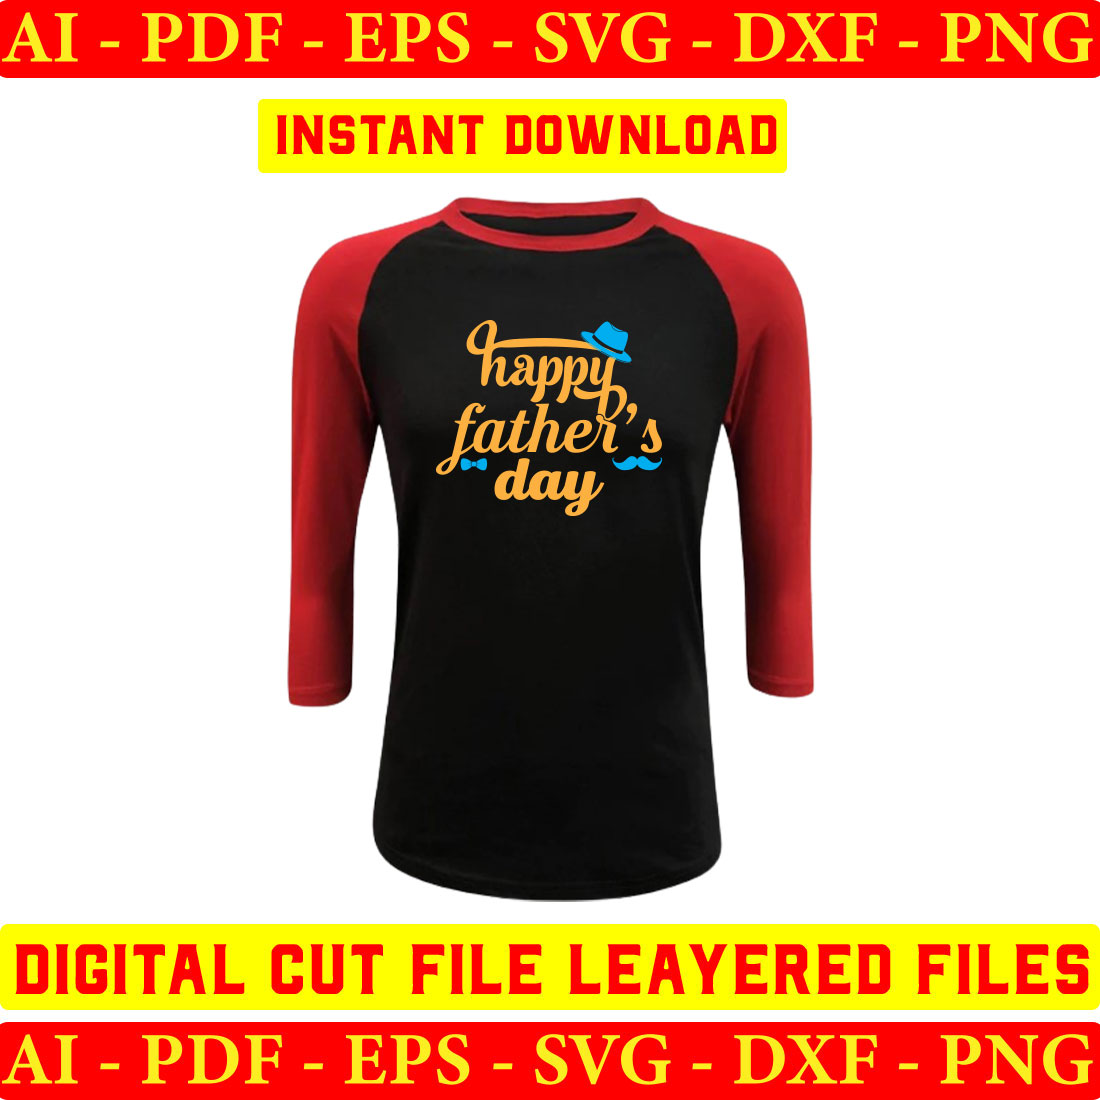 Black and red shirt with the words happy father's day on it.